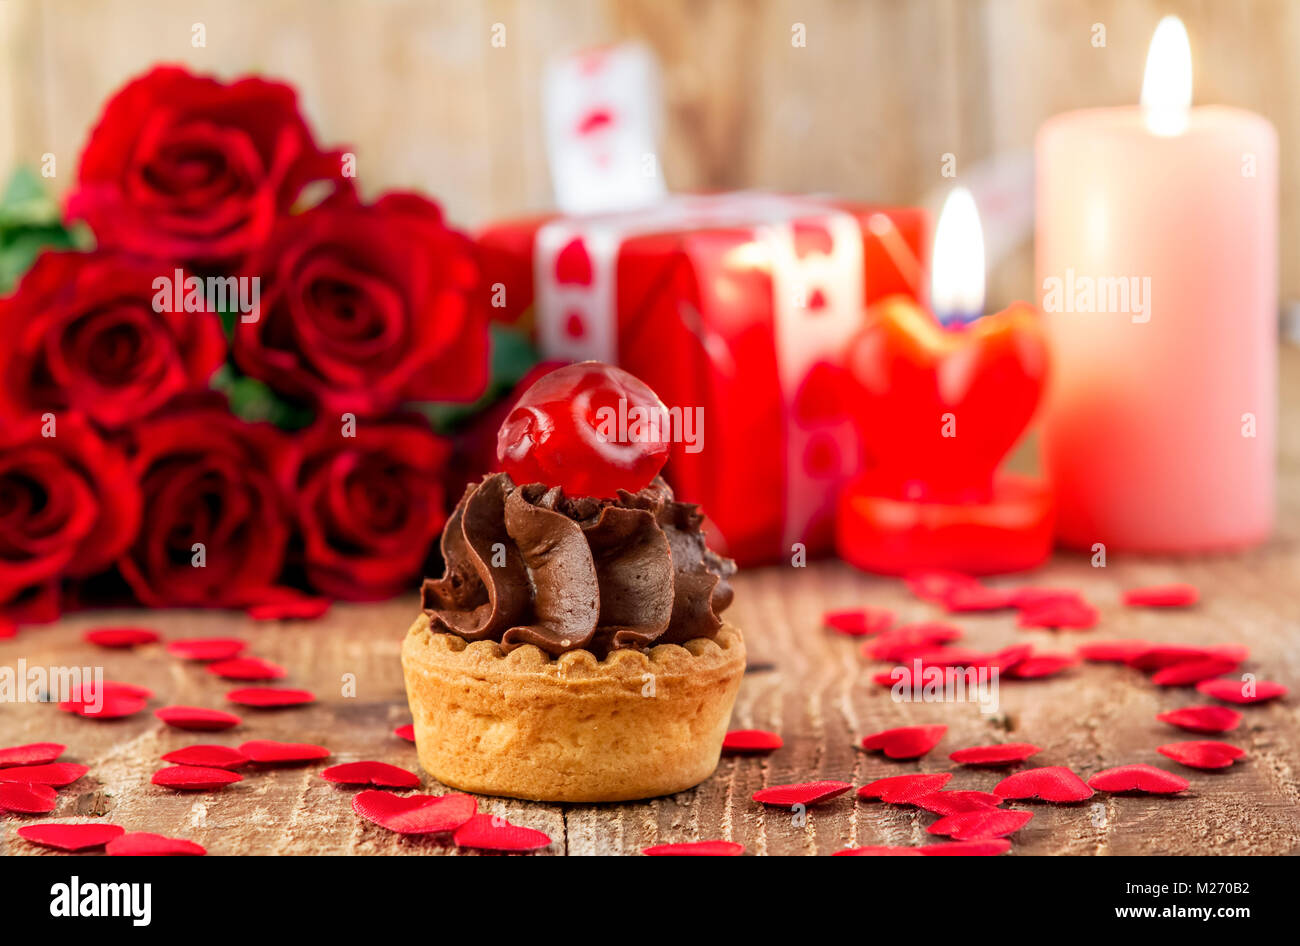 Cupcake with cherry in front of bouquet of red roses and candles on wooden background. Valentines day concept. Focus on cake! Stock Photo